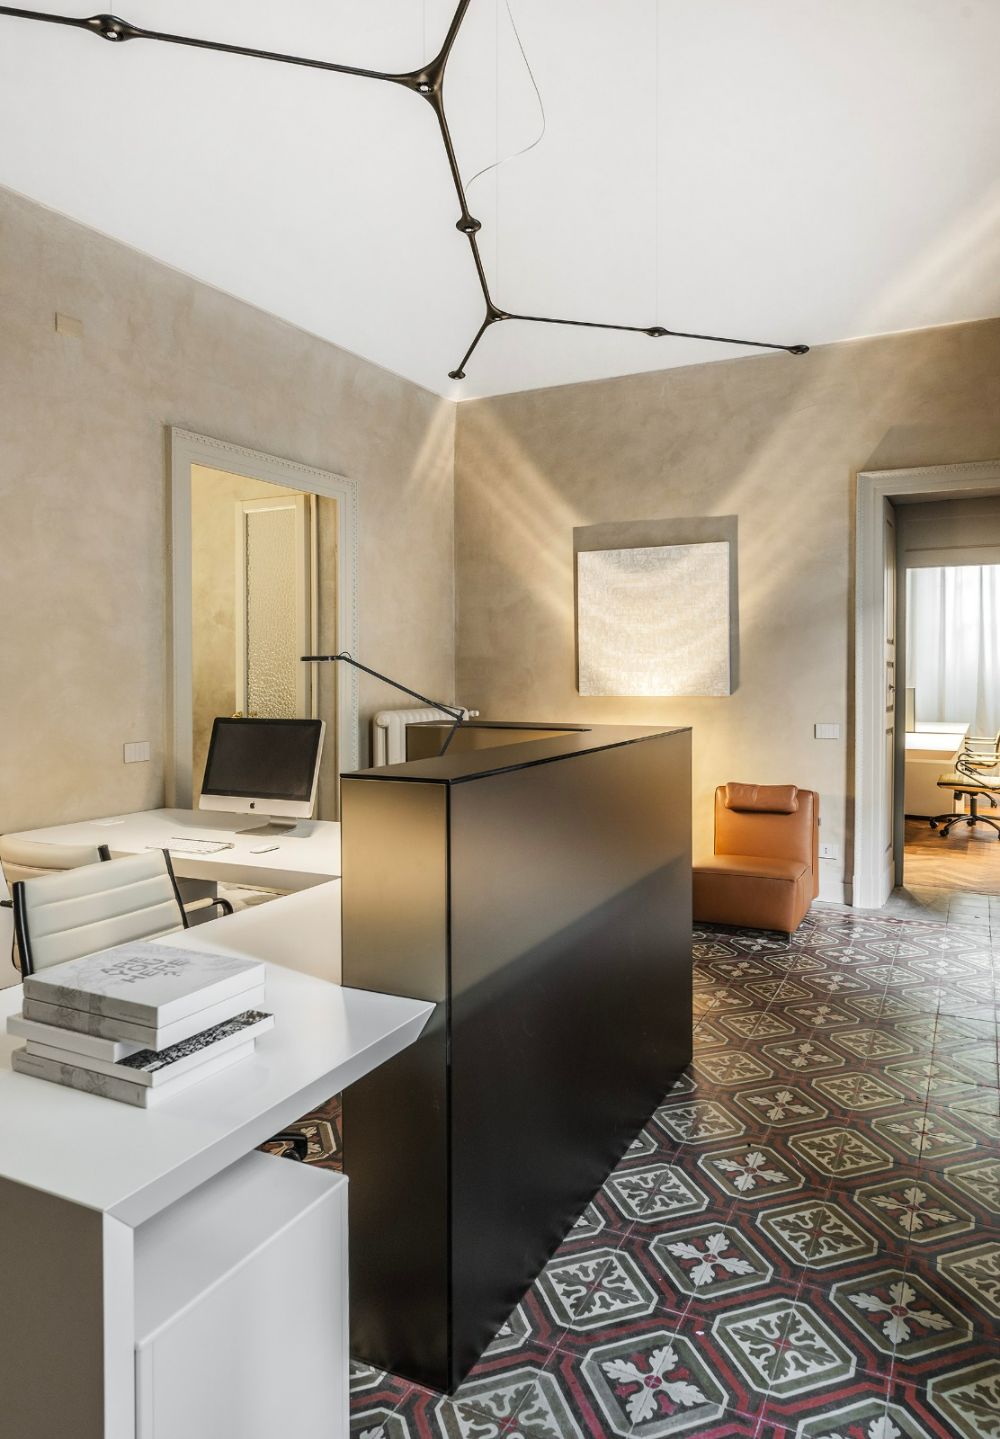 Office In Piacenza Italy Featuring Carbon Light By Tokio Project Designers Guglielmetti Interior 13, Design Authority